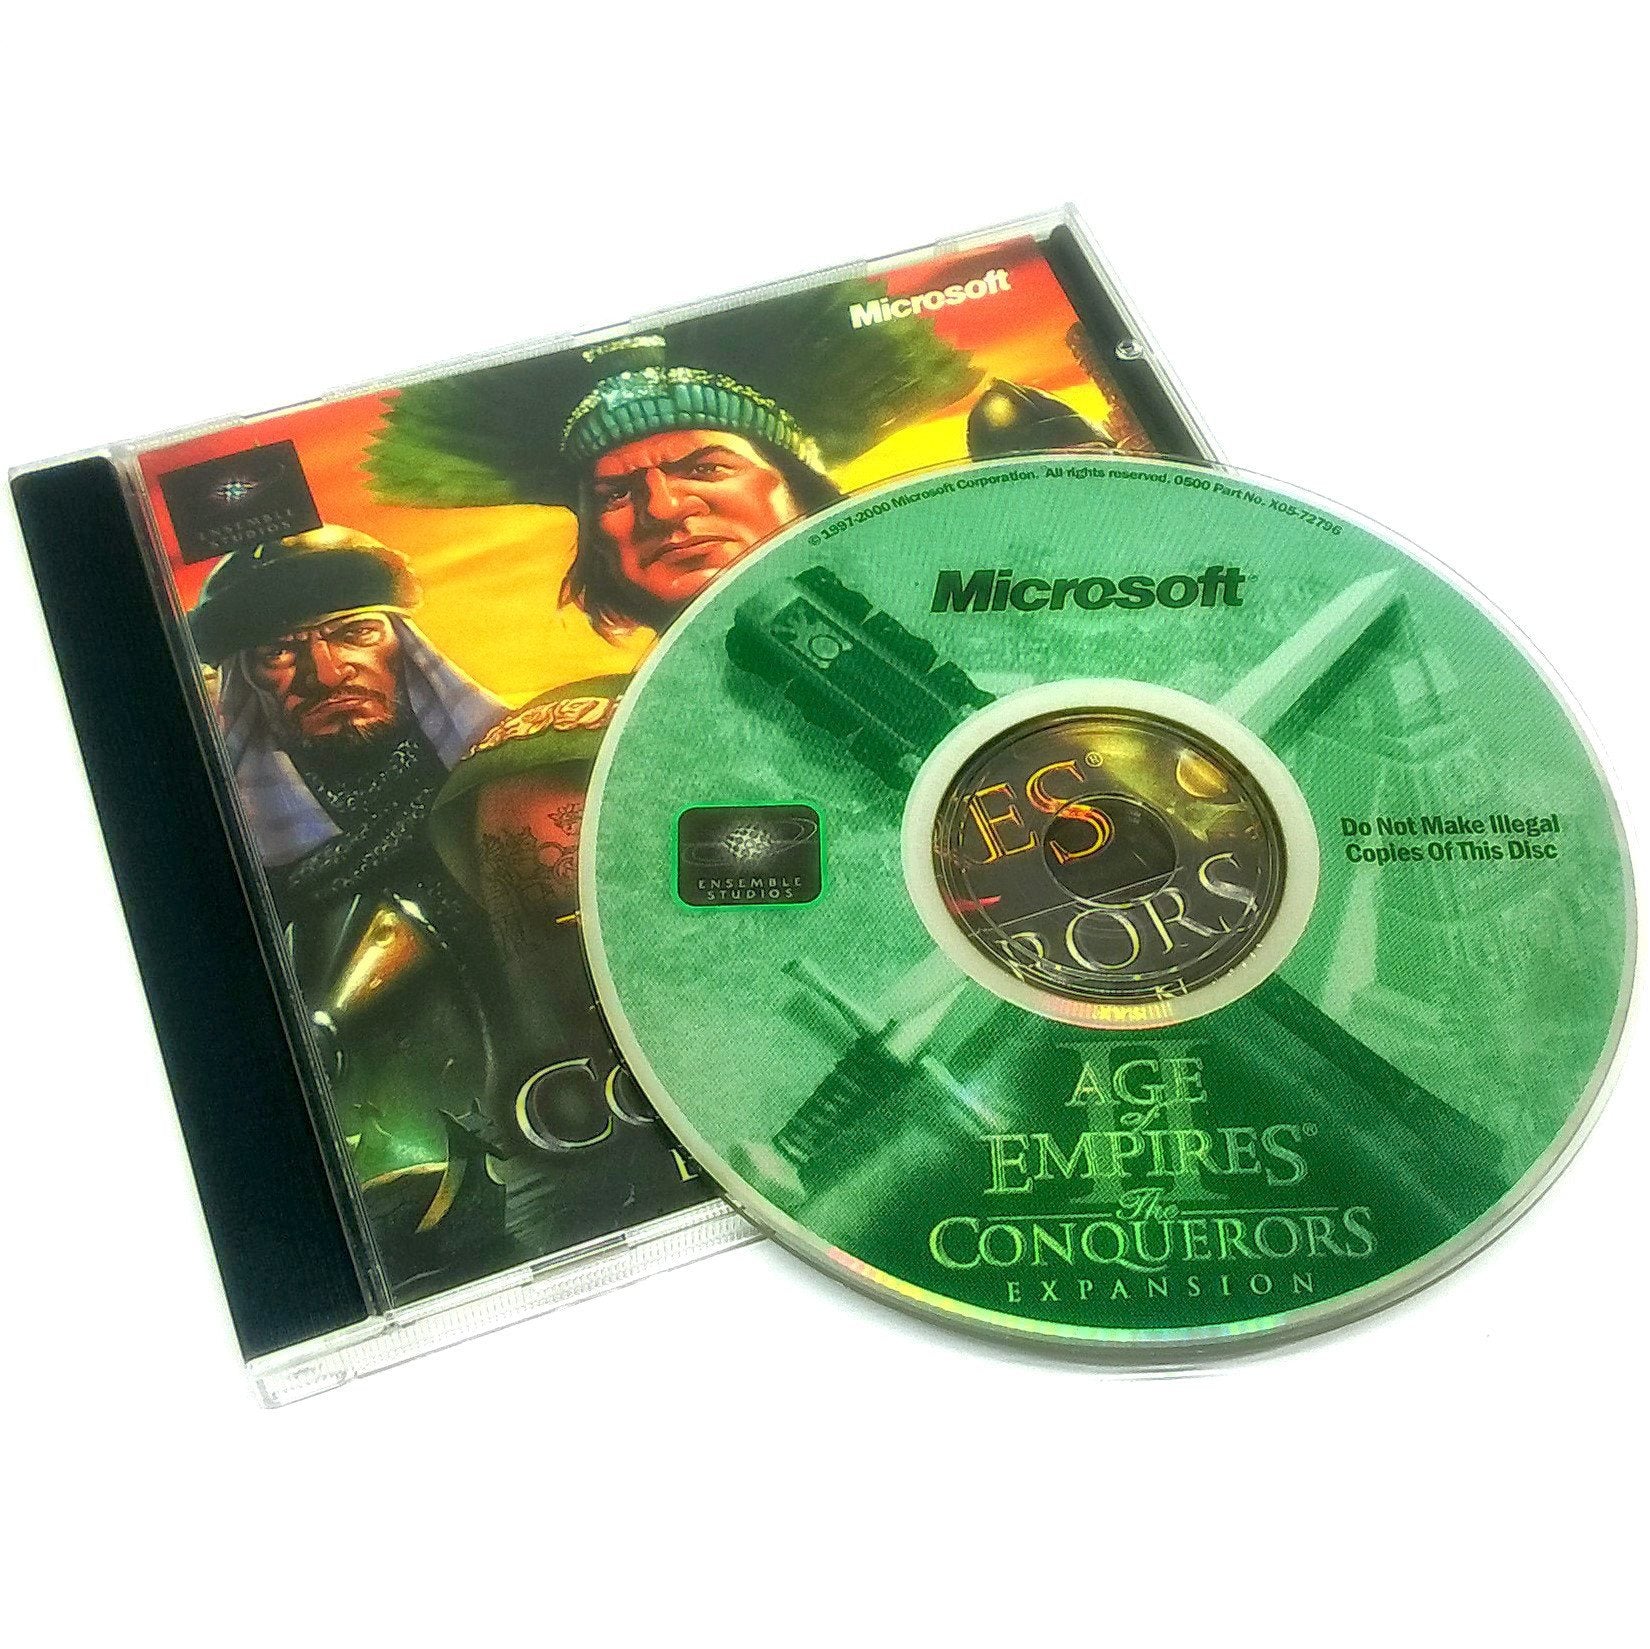 Age of Empires II: The Conquerors PC CD-ROM Game